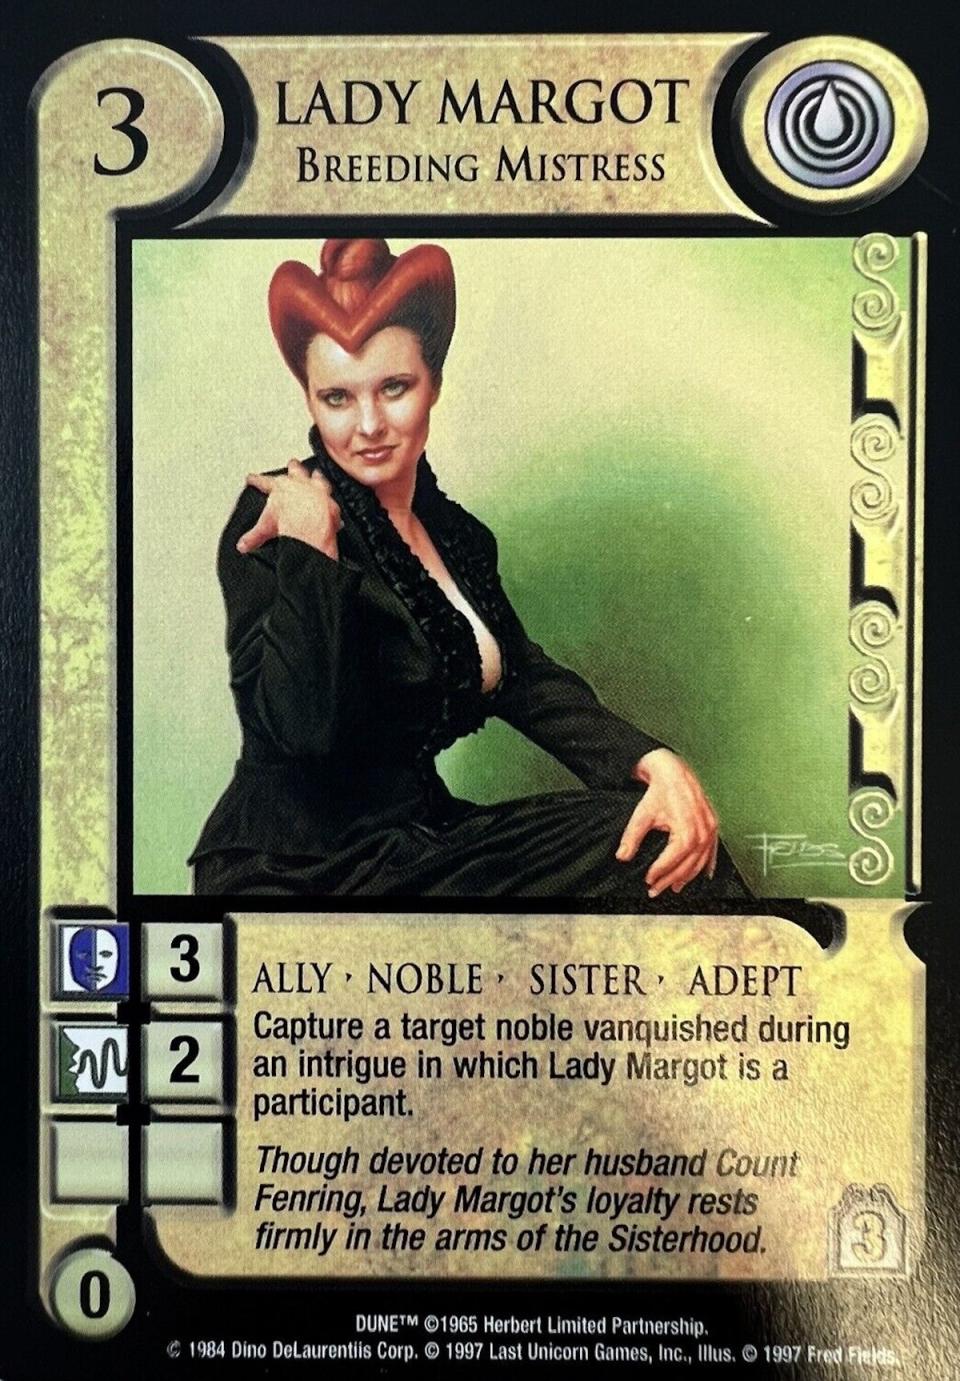 A Dune card game card for a red-haired Lady Margot